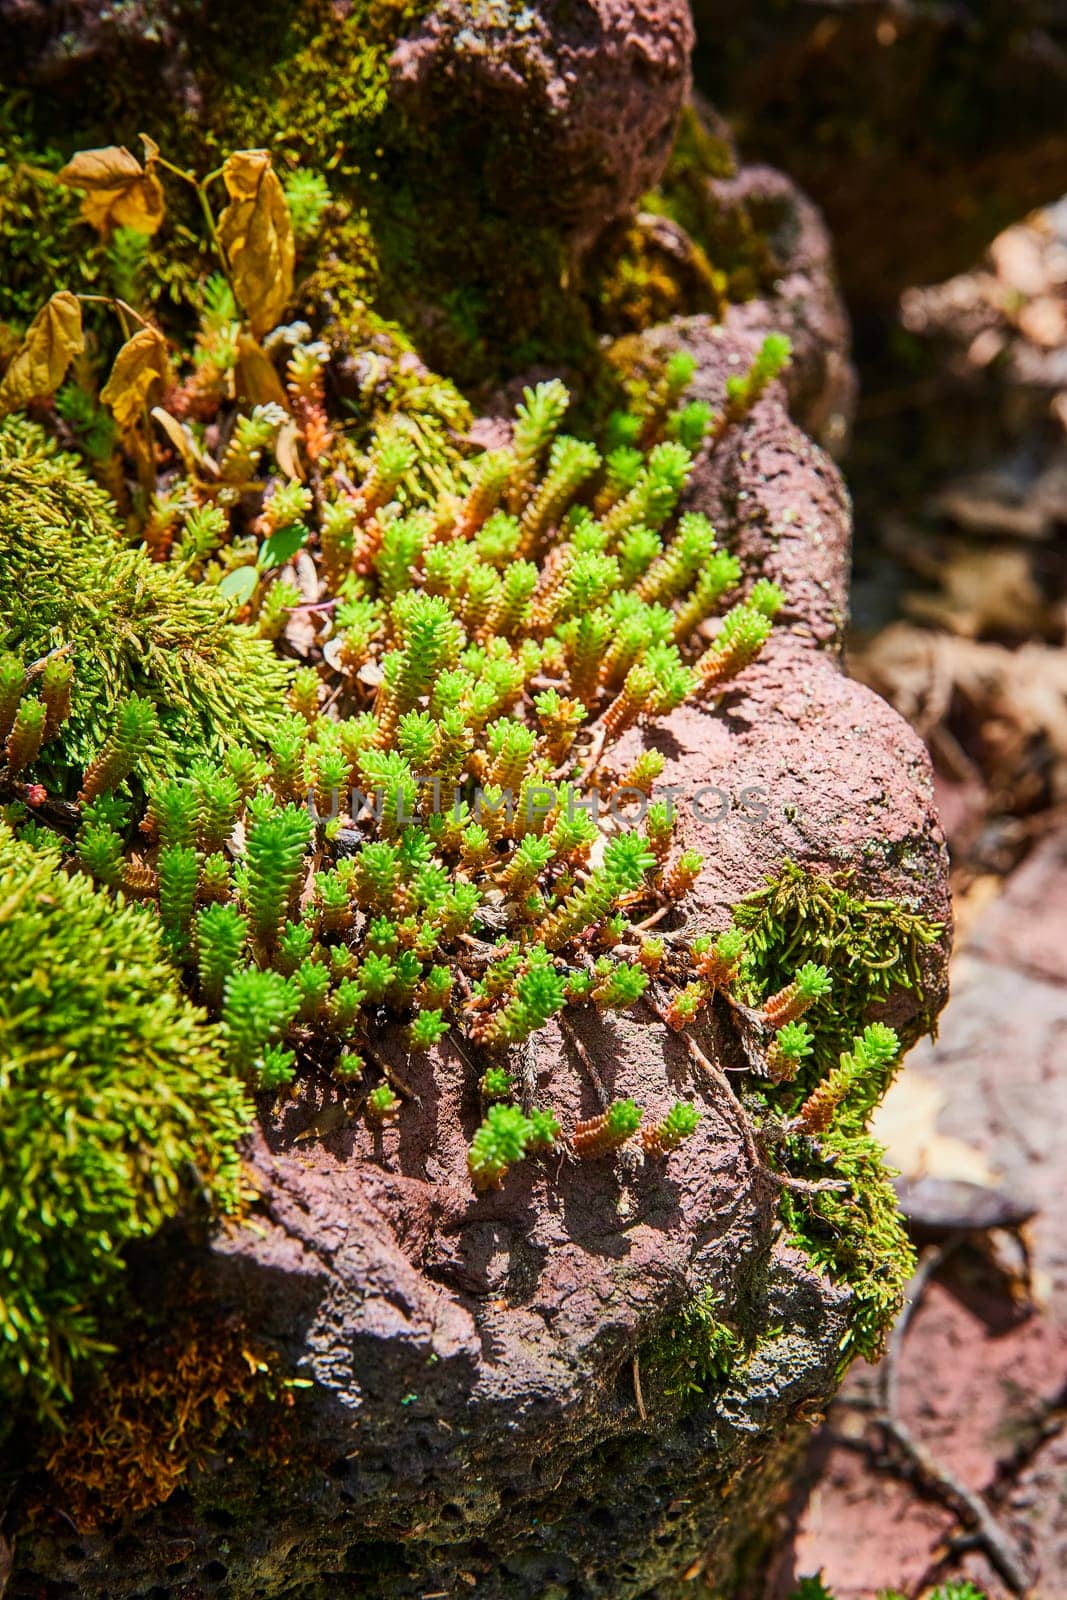 Lush sedum thrives on a mossy volcanic rock, showcasing nature's resilience in a vibrant close-up.